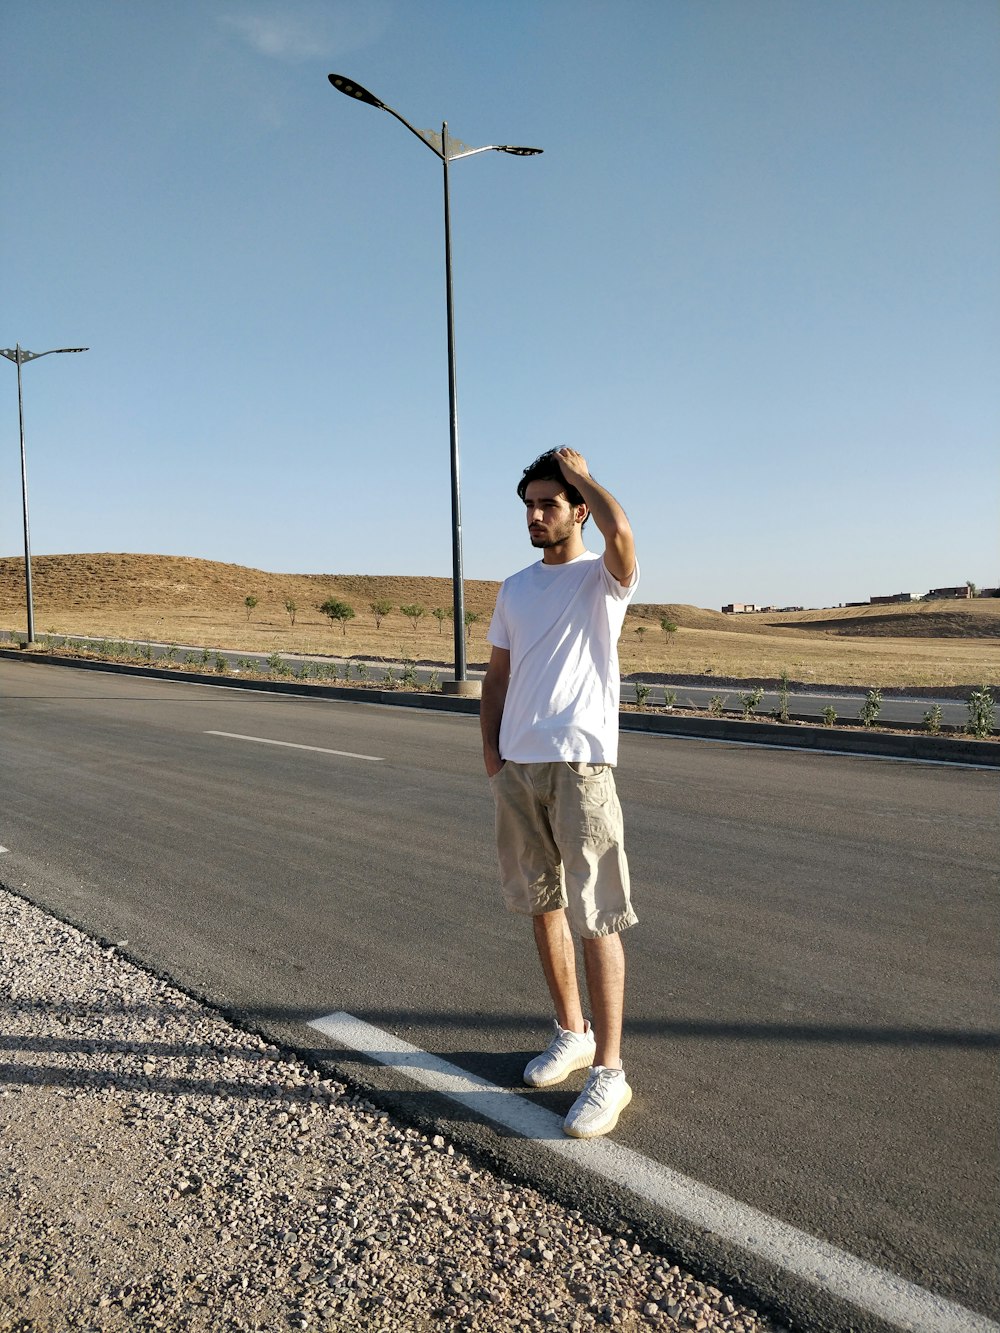 a man standing on the side of a road next to a street light